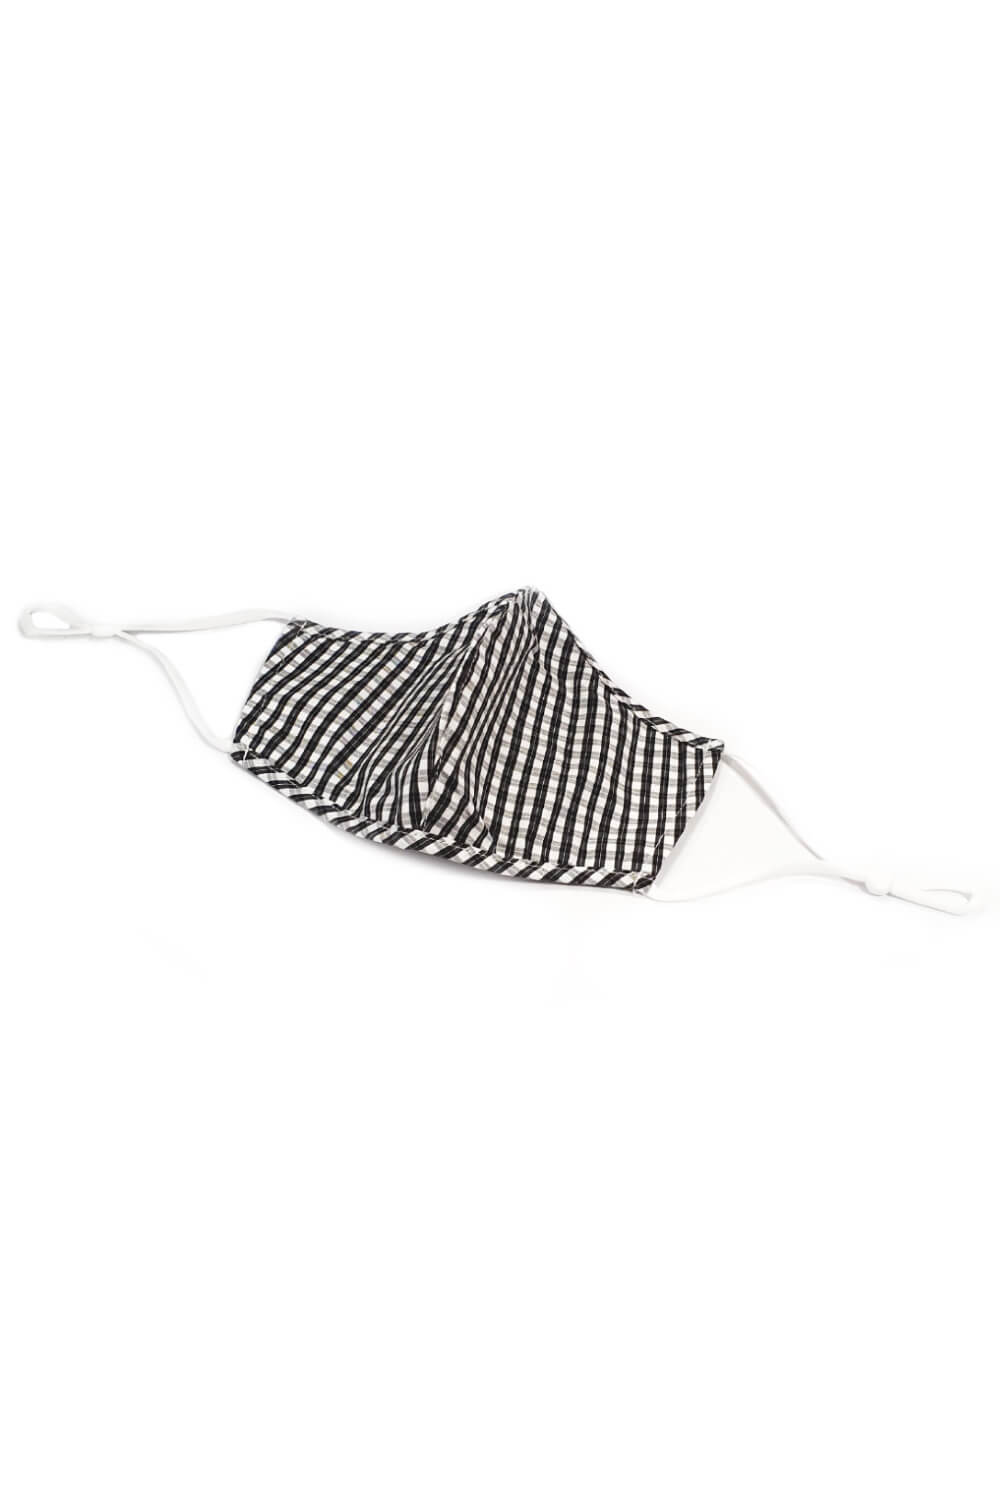 Black Gingham Check Fast Drying Fashion Face Mask, Image 2 of 2